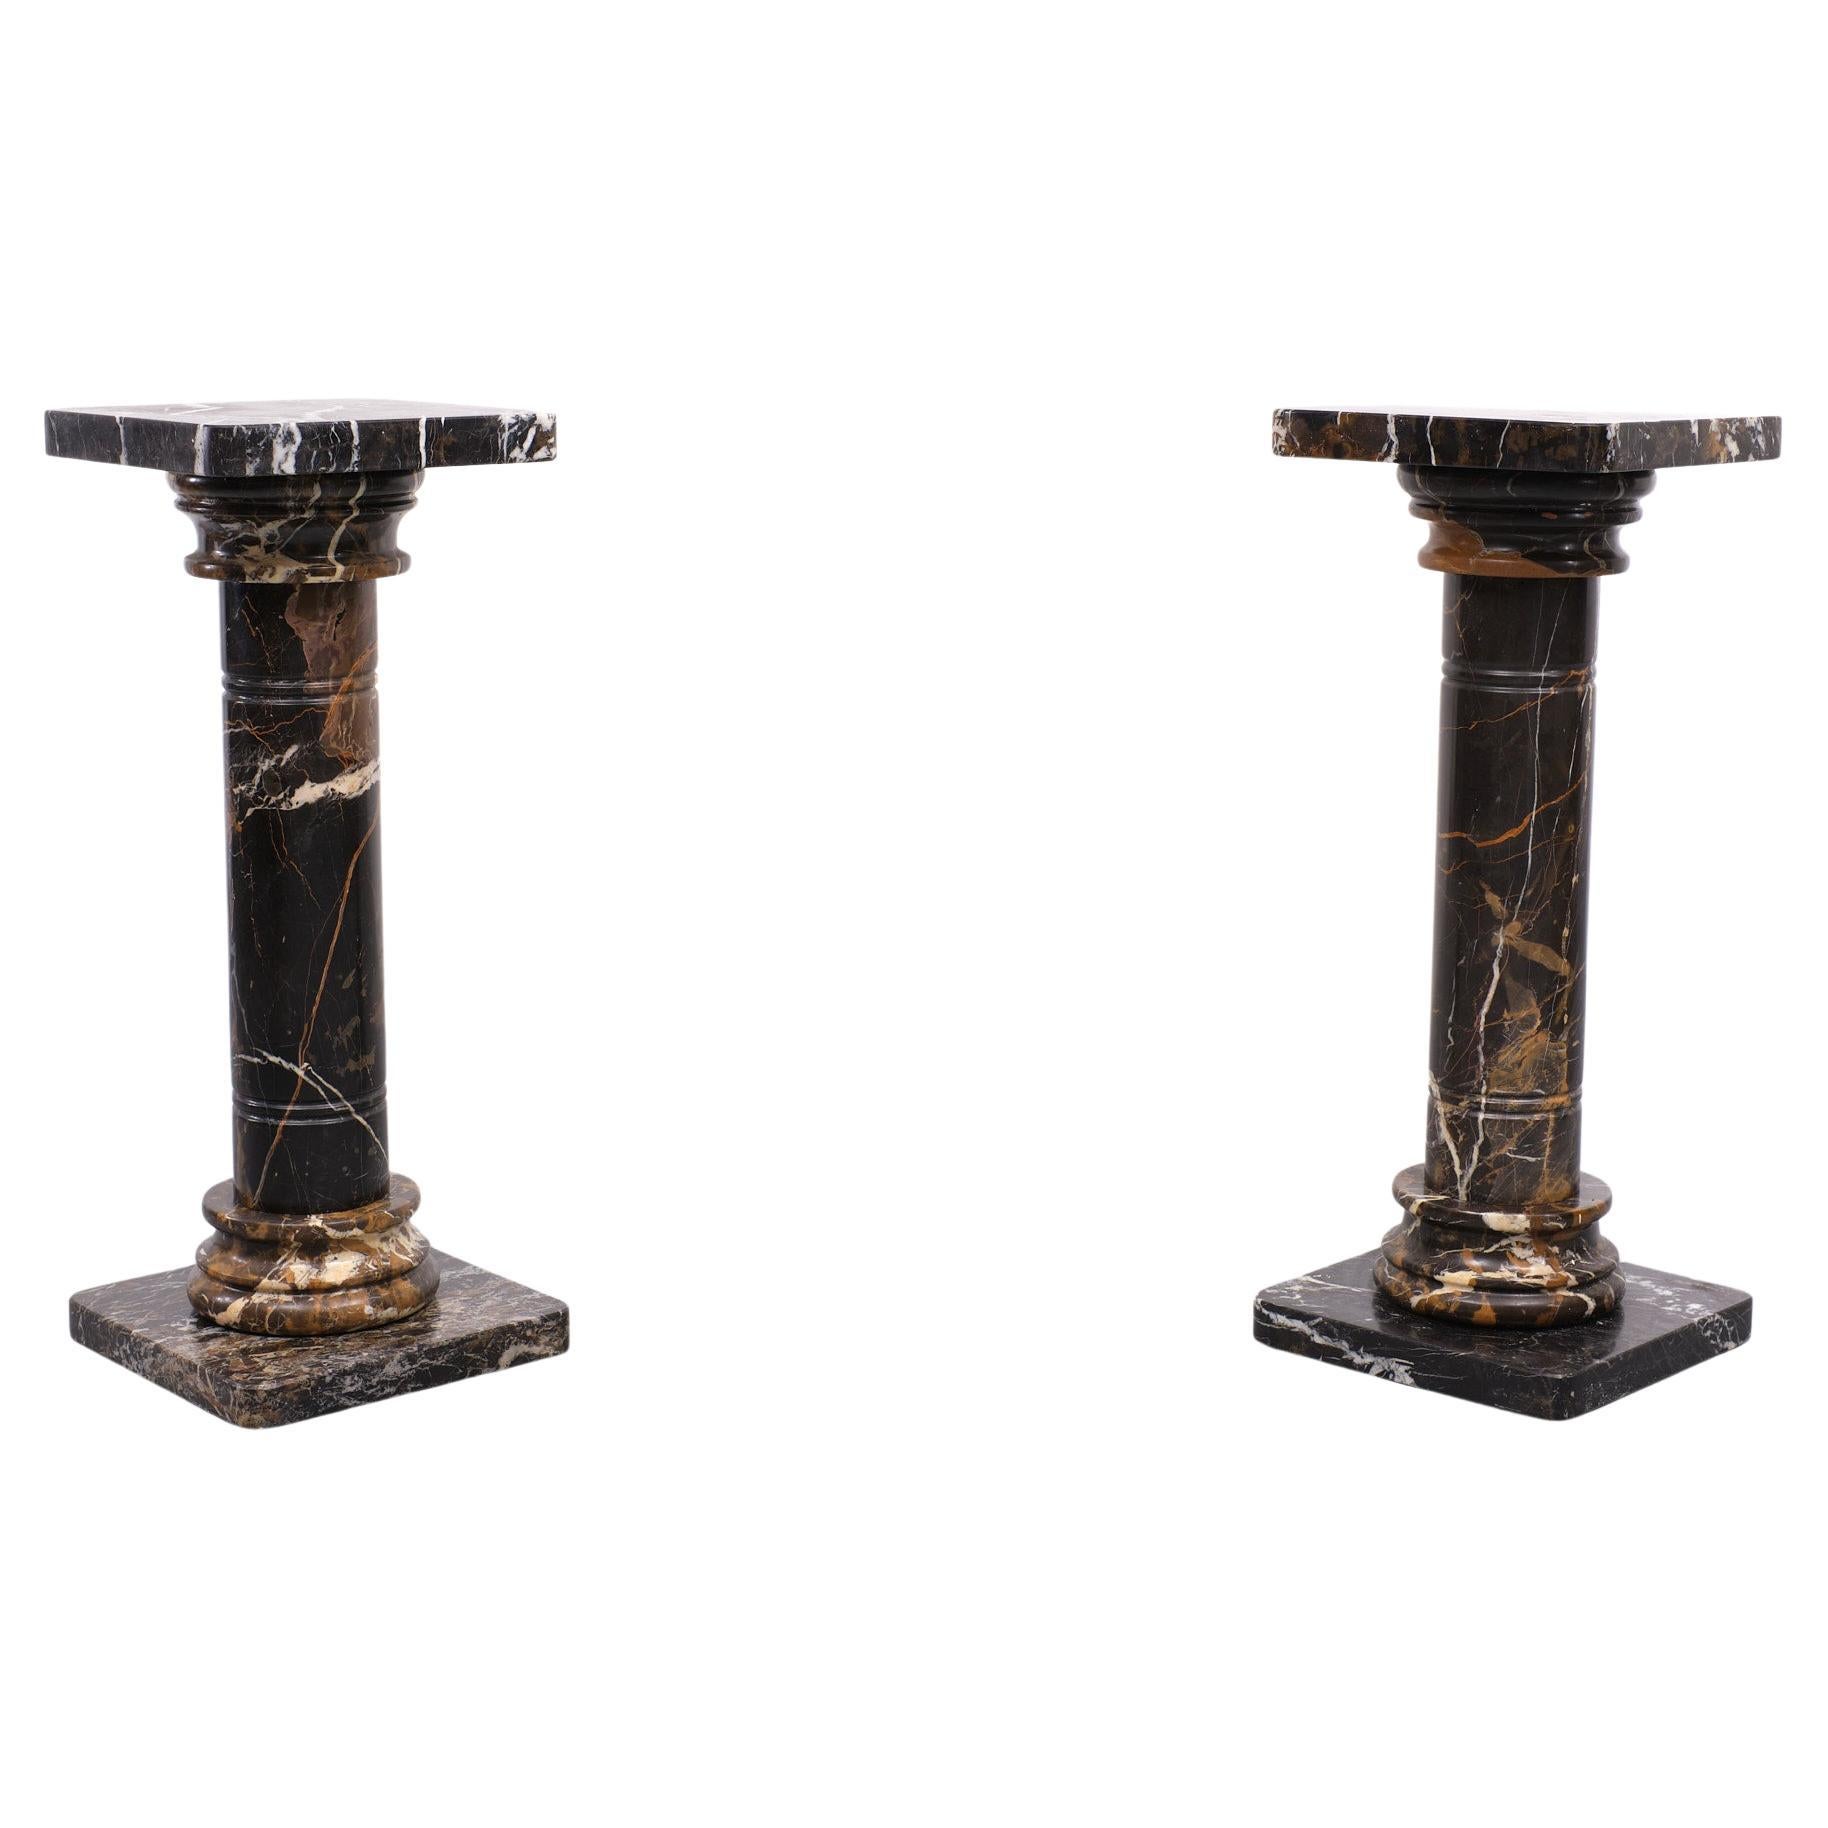 Stunning set Pedestals executed in portoro marble. So full of live and color.
Art Deco Portoro Marble or Marmo di Portovenere? It is quarried in the Gulf of La Spezia (Liguria), Italy 
The Portoro is a fine-grained, black marble with gold veining